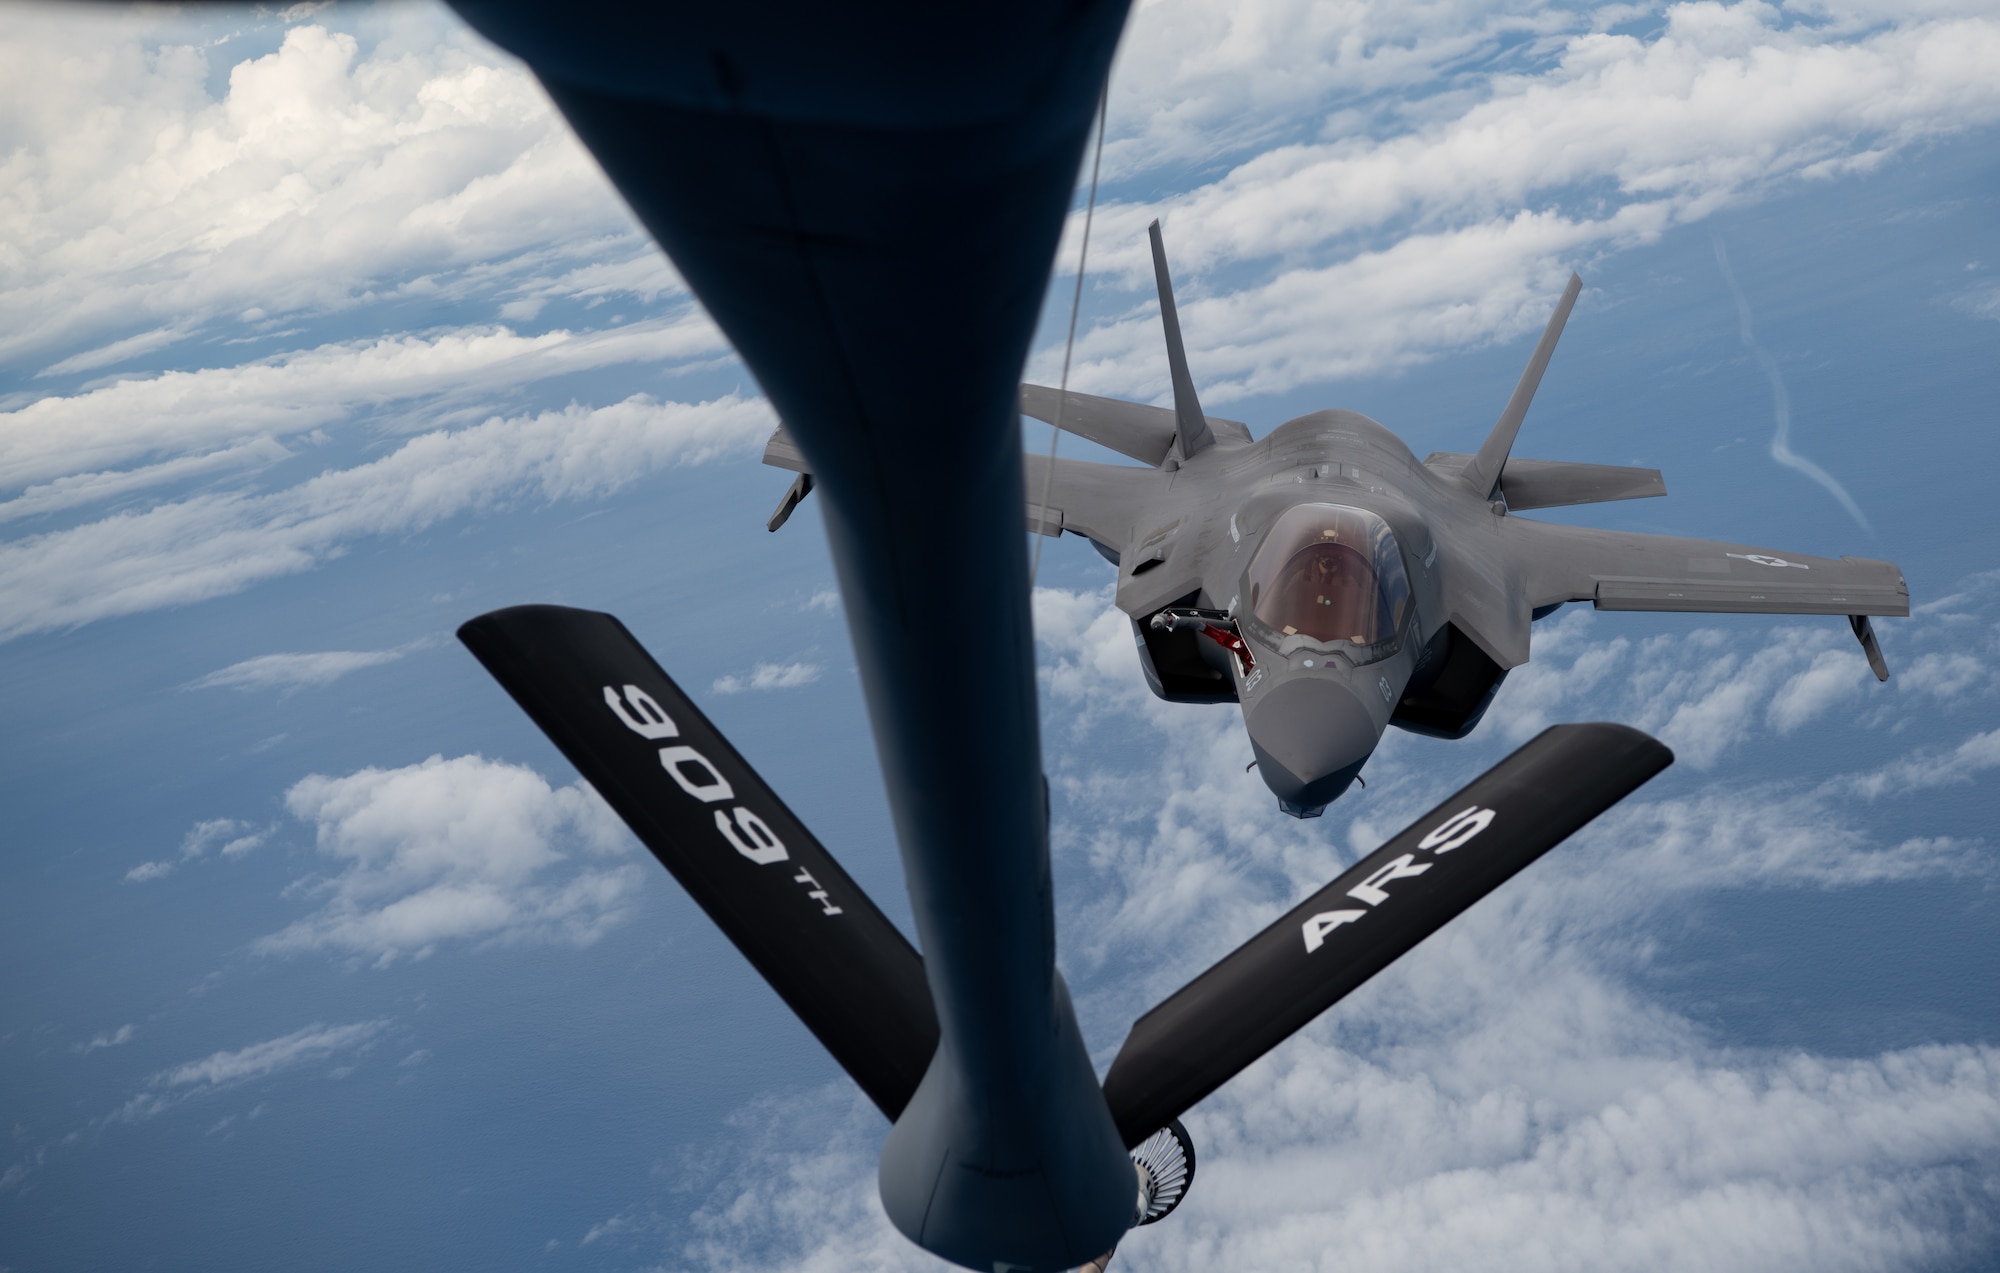 A U.S. Marine Corps F-35B Lightning II, Marine Fighter Attack Squadron based out of Marine Corps Air Station MCAS Iwakuni, Japan,  flies into position to receive fuel from a KC-135 Stratotanker assigned to the 909th Air Refueling Squadron, Kadena Air Base, Japan during a Large Scale Global Exercise 21 mission over the western Pacific Ocean, Aug. 18, 2021. U.S. joint forces is the most lethal, capable, and innovative fighting force operating today. (U.S. Air Force photo by Tech. Sgt. Micaiah Anthony)